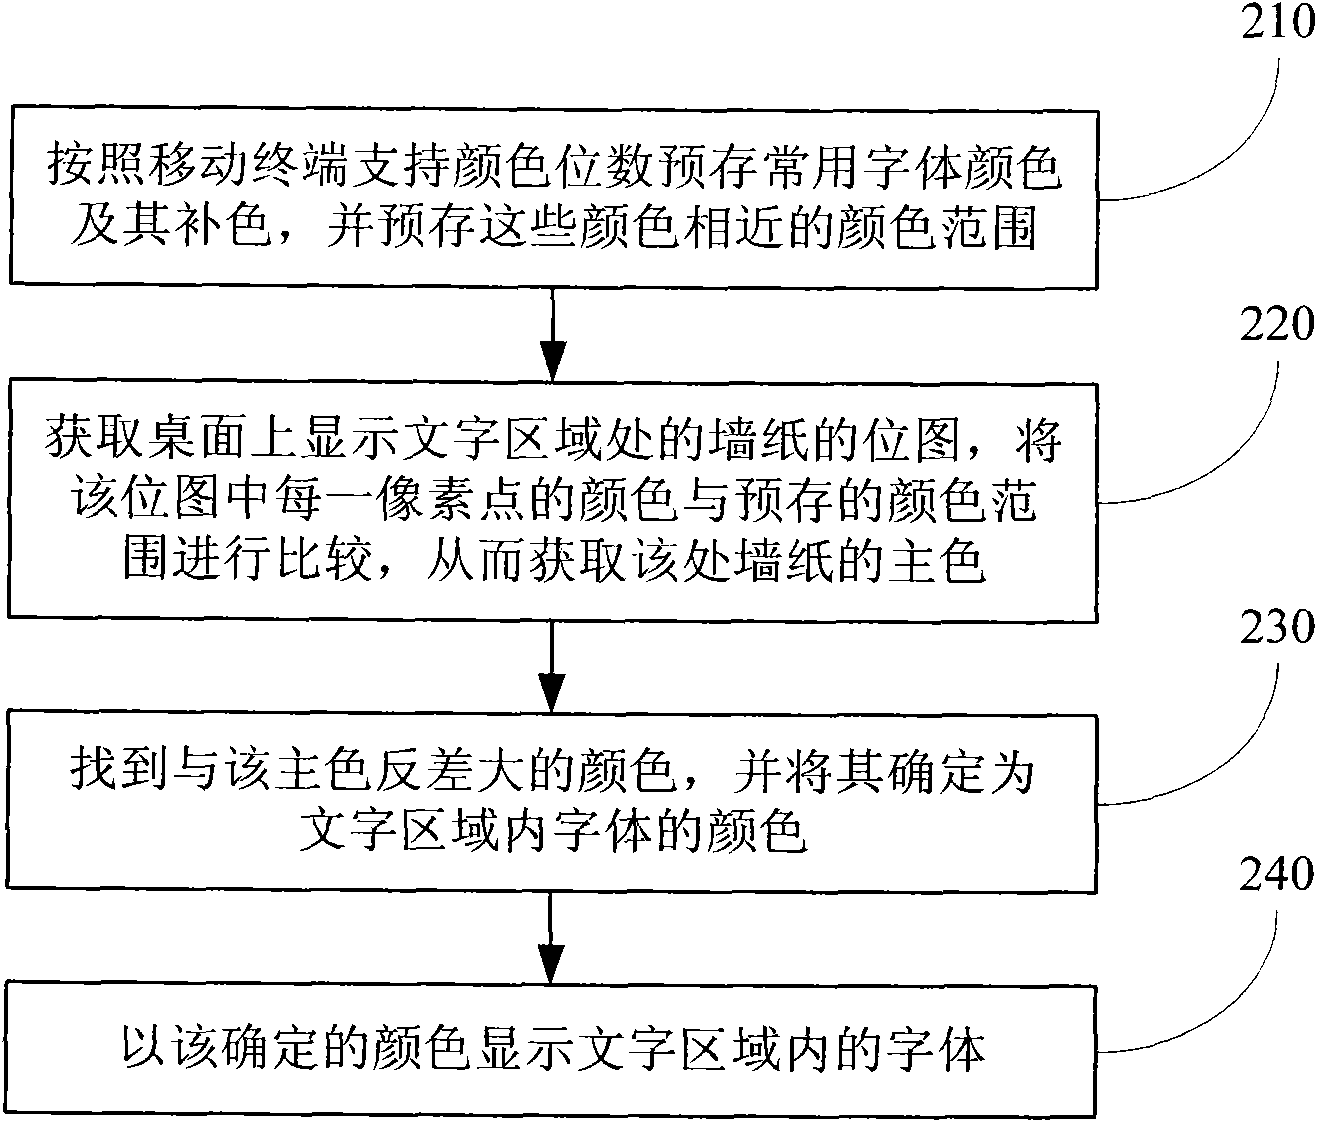 Method and apparatus for displaying colorful desktop text by mobile terminal